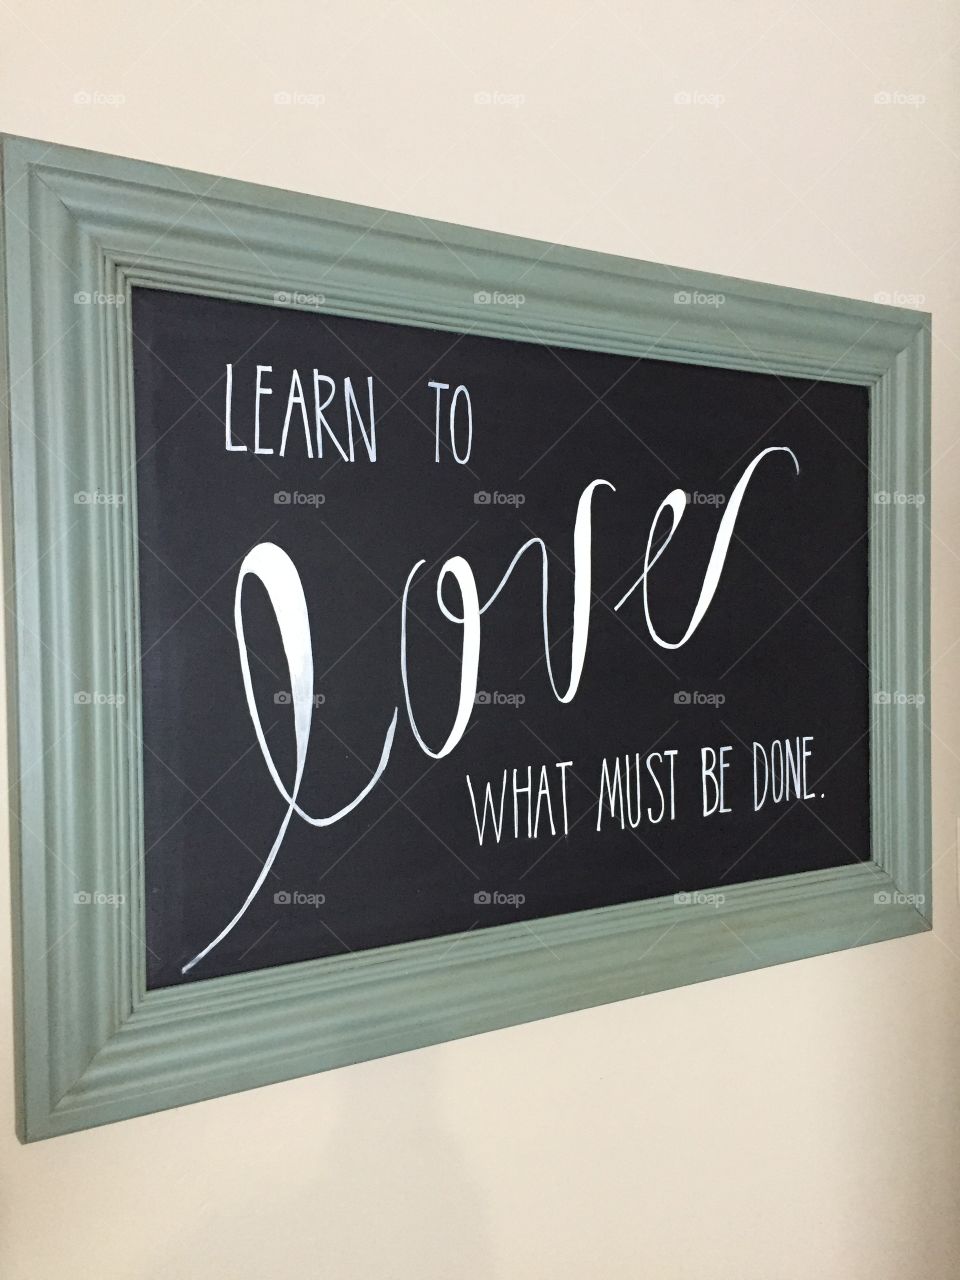 Learn To Love What Must Be Done. Written with white paint on a black board.